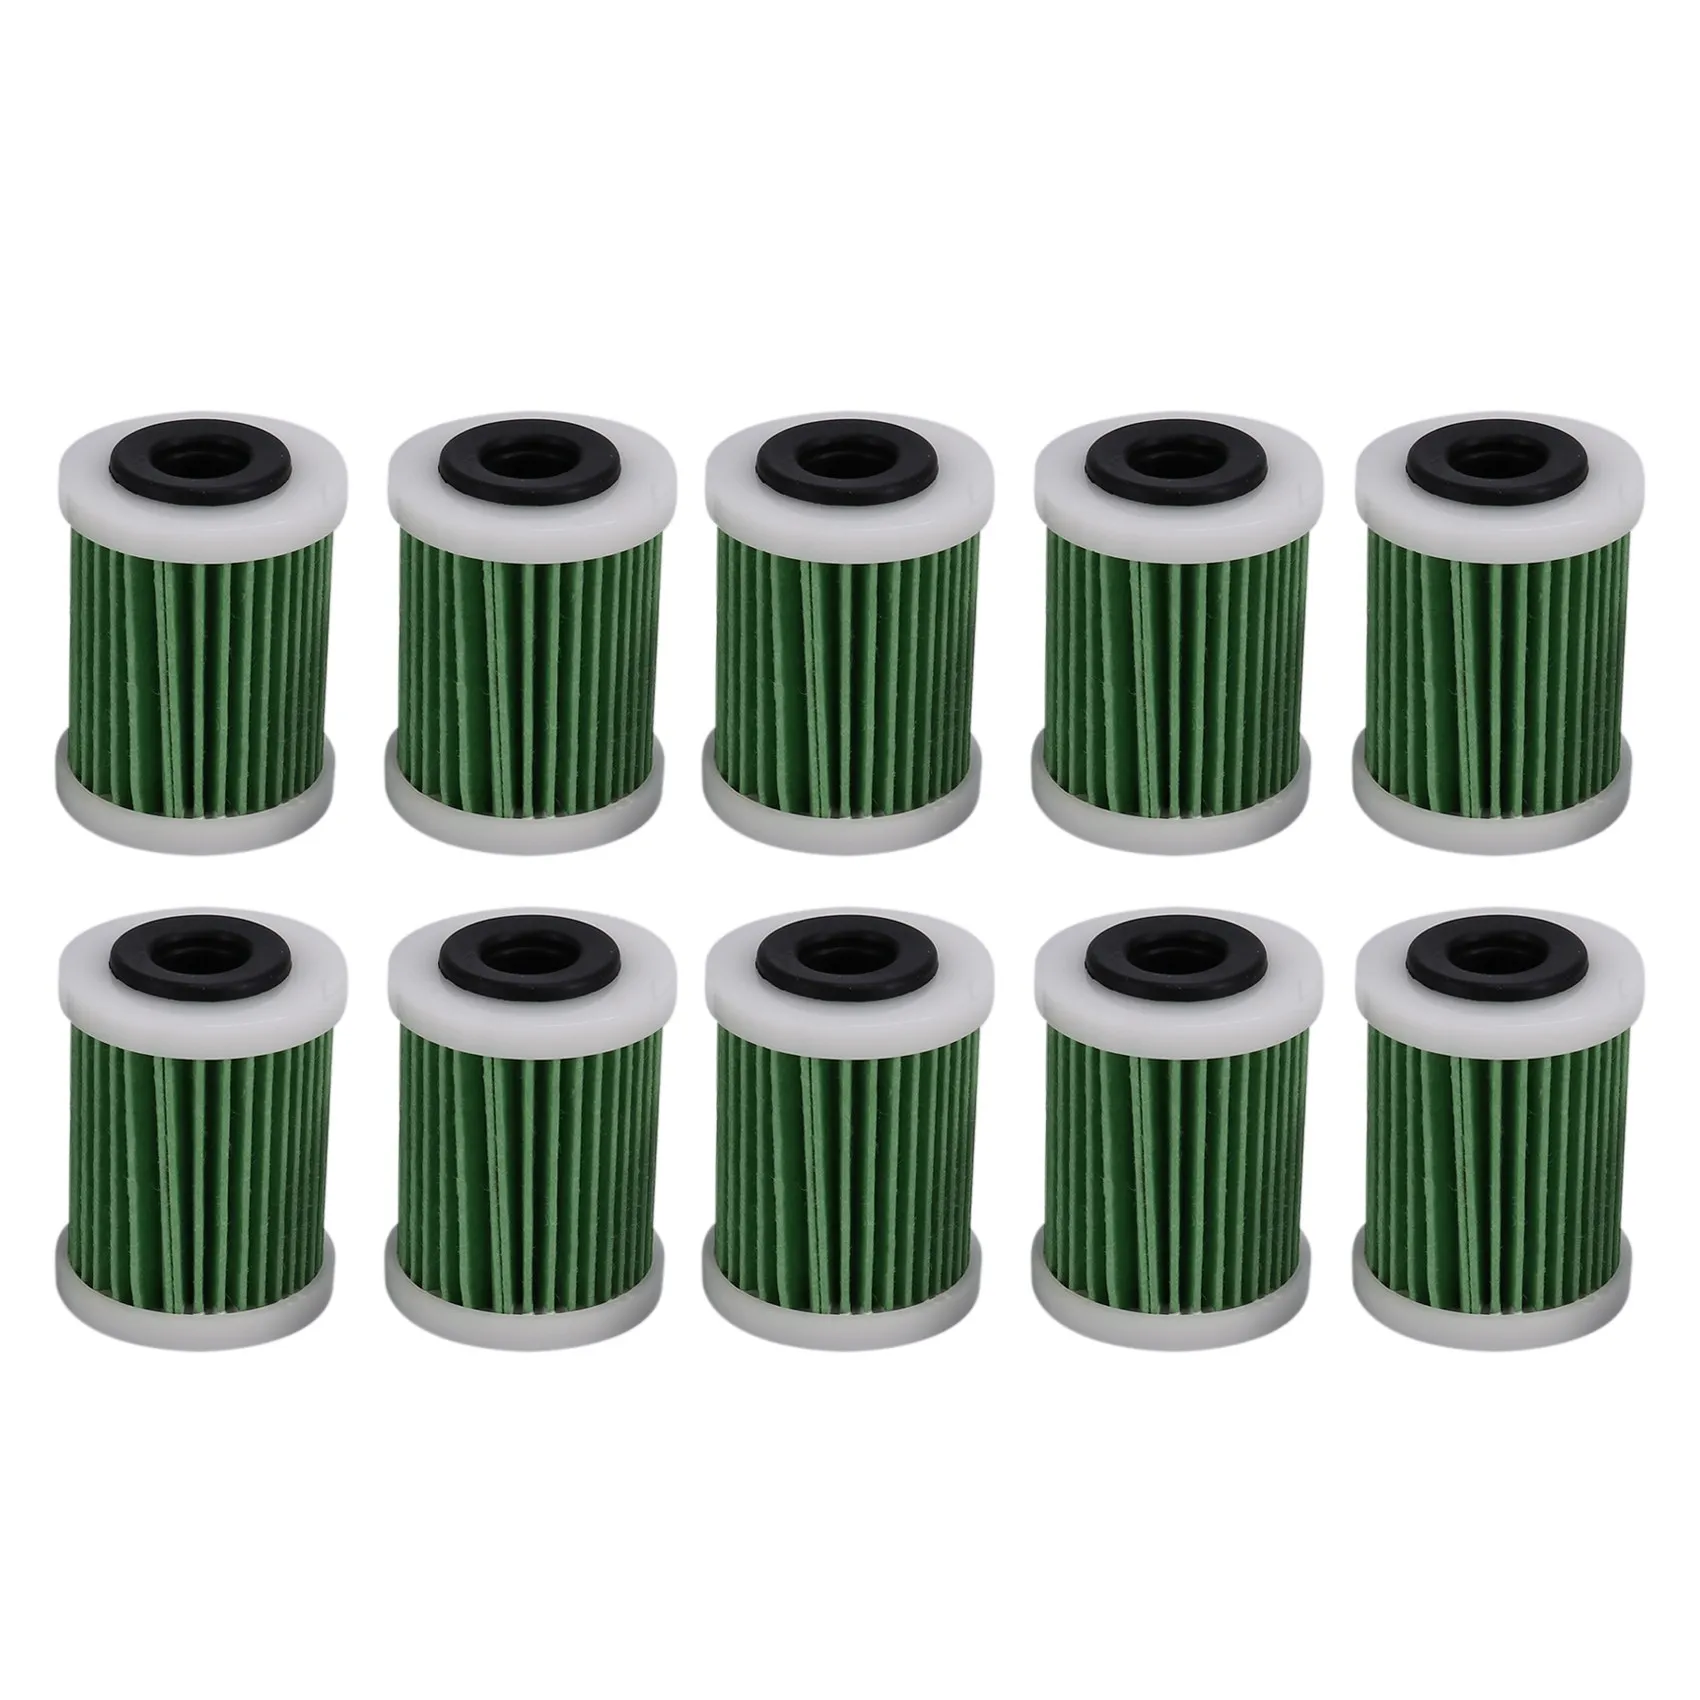 

10Pcs Fuel Filter 6P3-WS24A-01-00 for Yamaha Outboard Engine 150Hp 225Hp 250Hp 425Hp 6P3-24563-01-00 VZ150 to VZ300